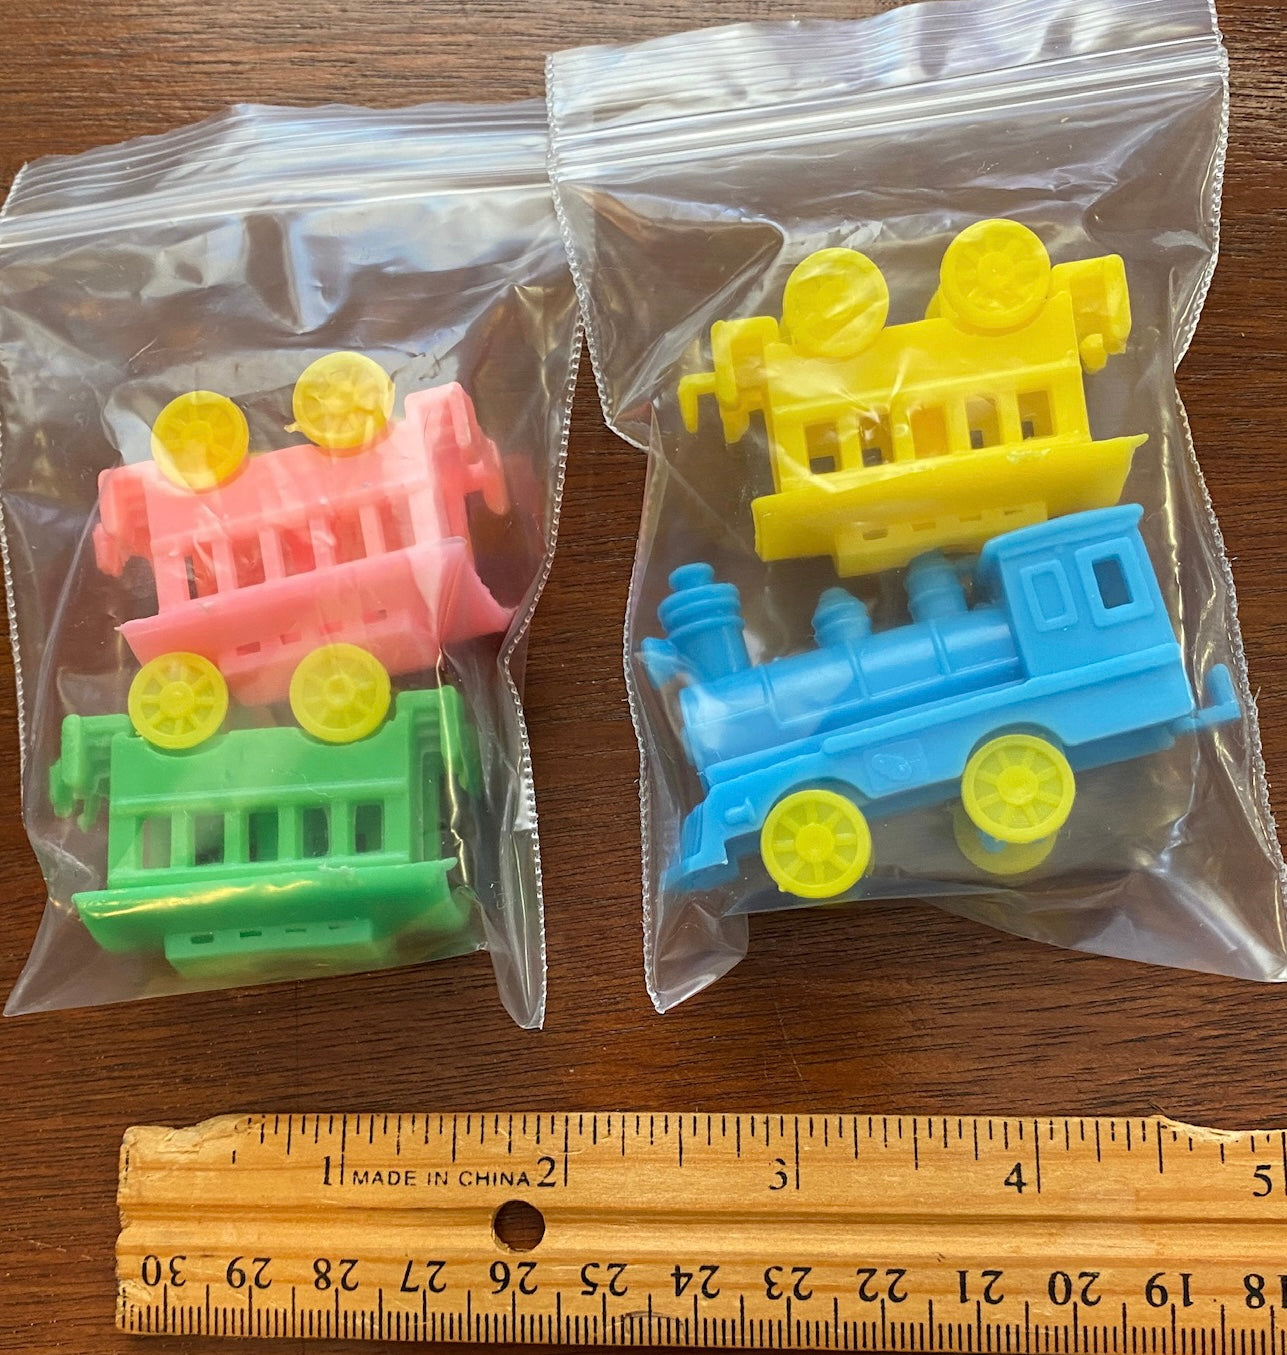 Lot of 4 Vintage Plastic Hong Kong Train Railroad Candle Holders for Cake